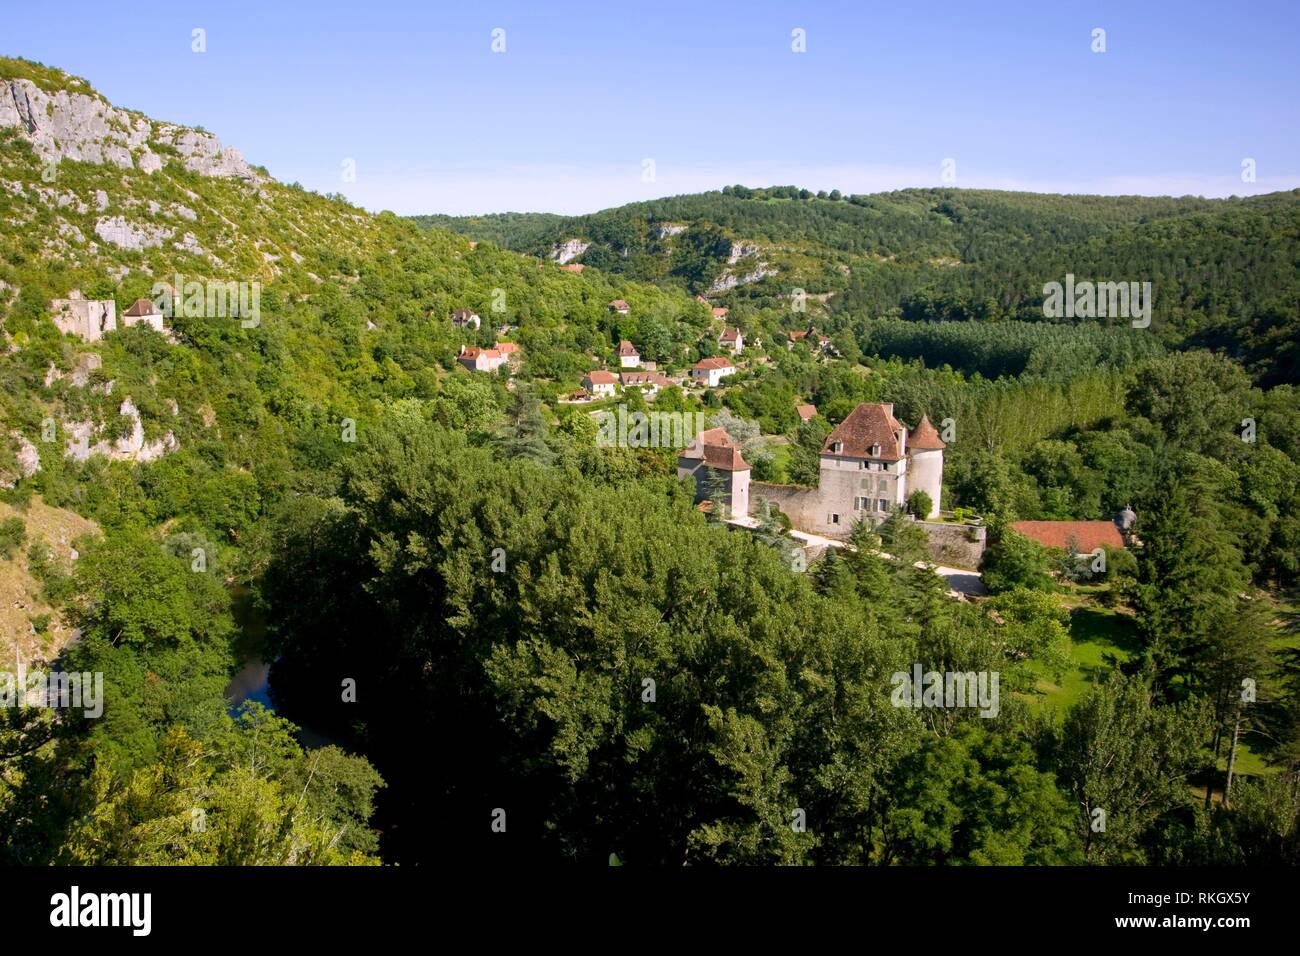 Picturesque rural valley and small chateau, Sauliac Sur Cele, Lot, France. Stock Photo